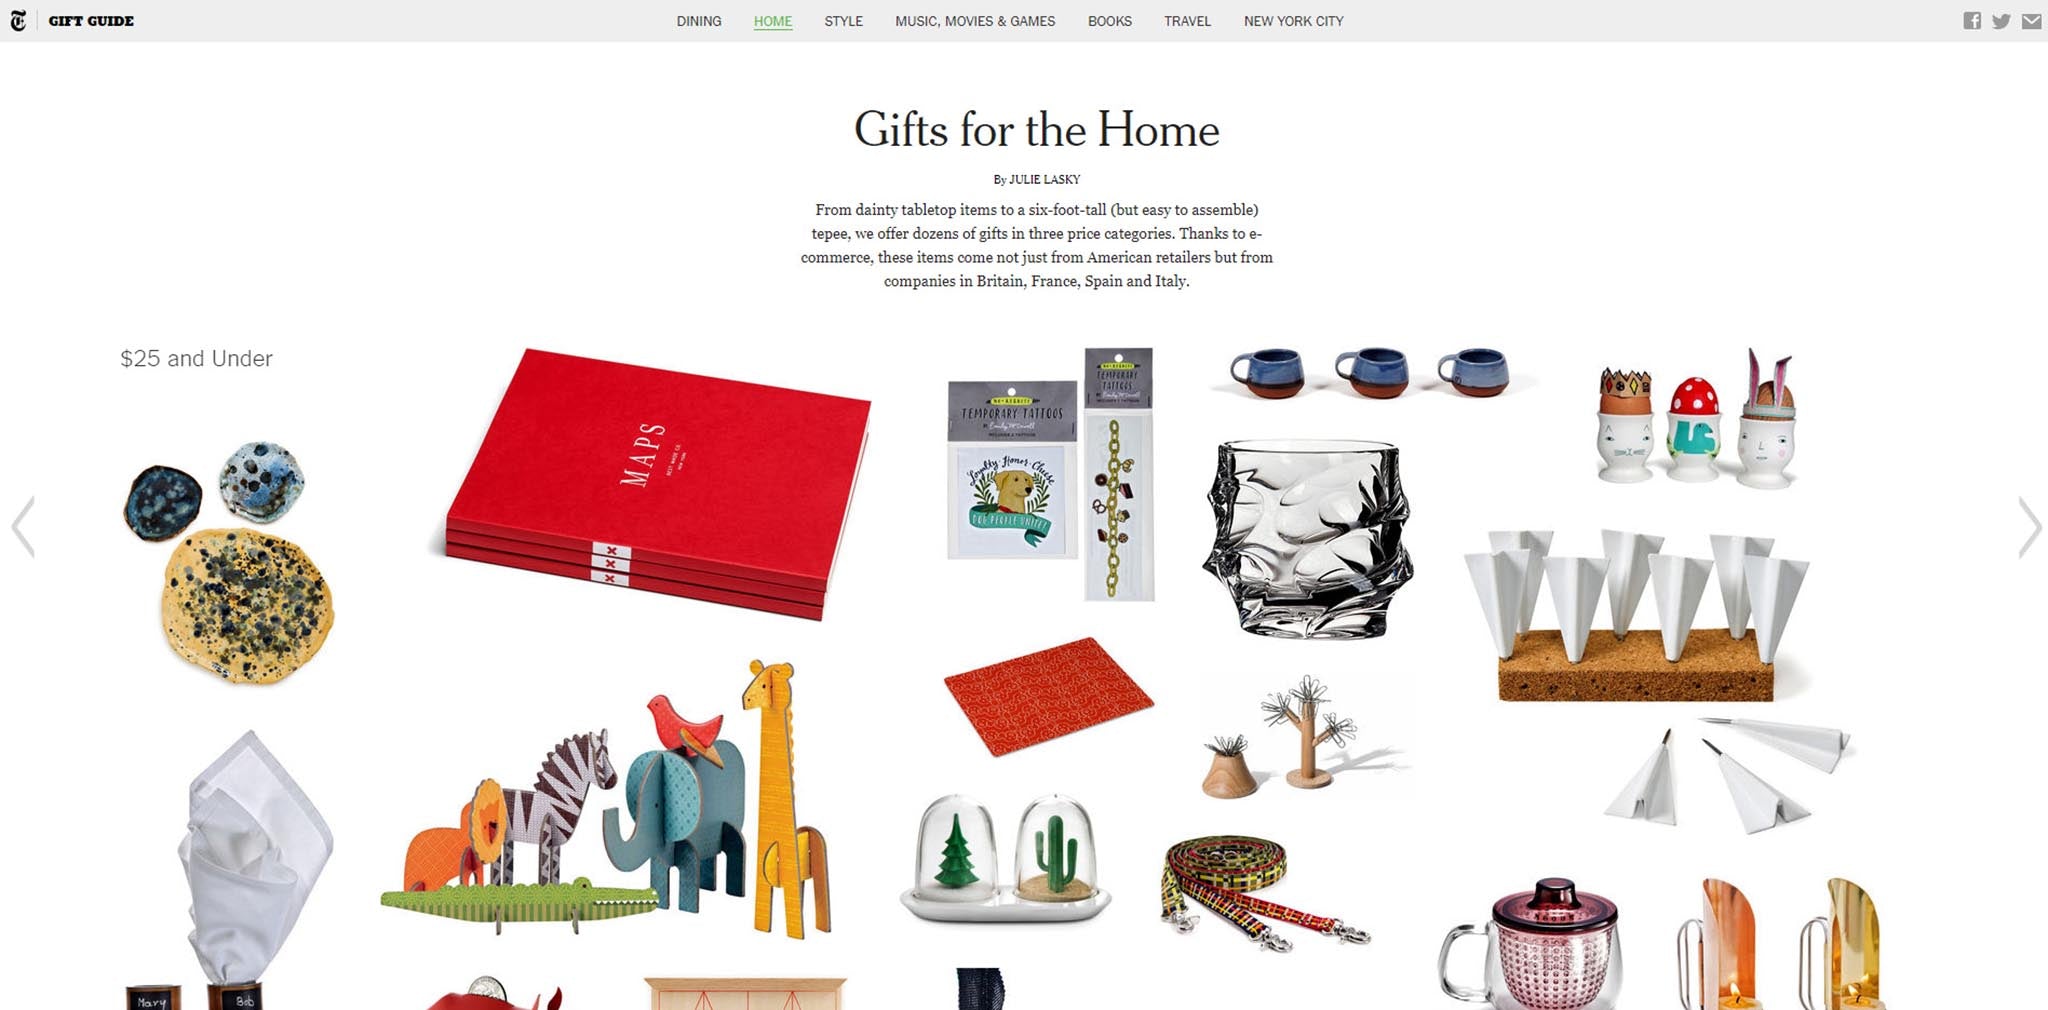 2013 New York Times Holiday Gift Guide. Gifts for the Home by Julie Lasky.